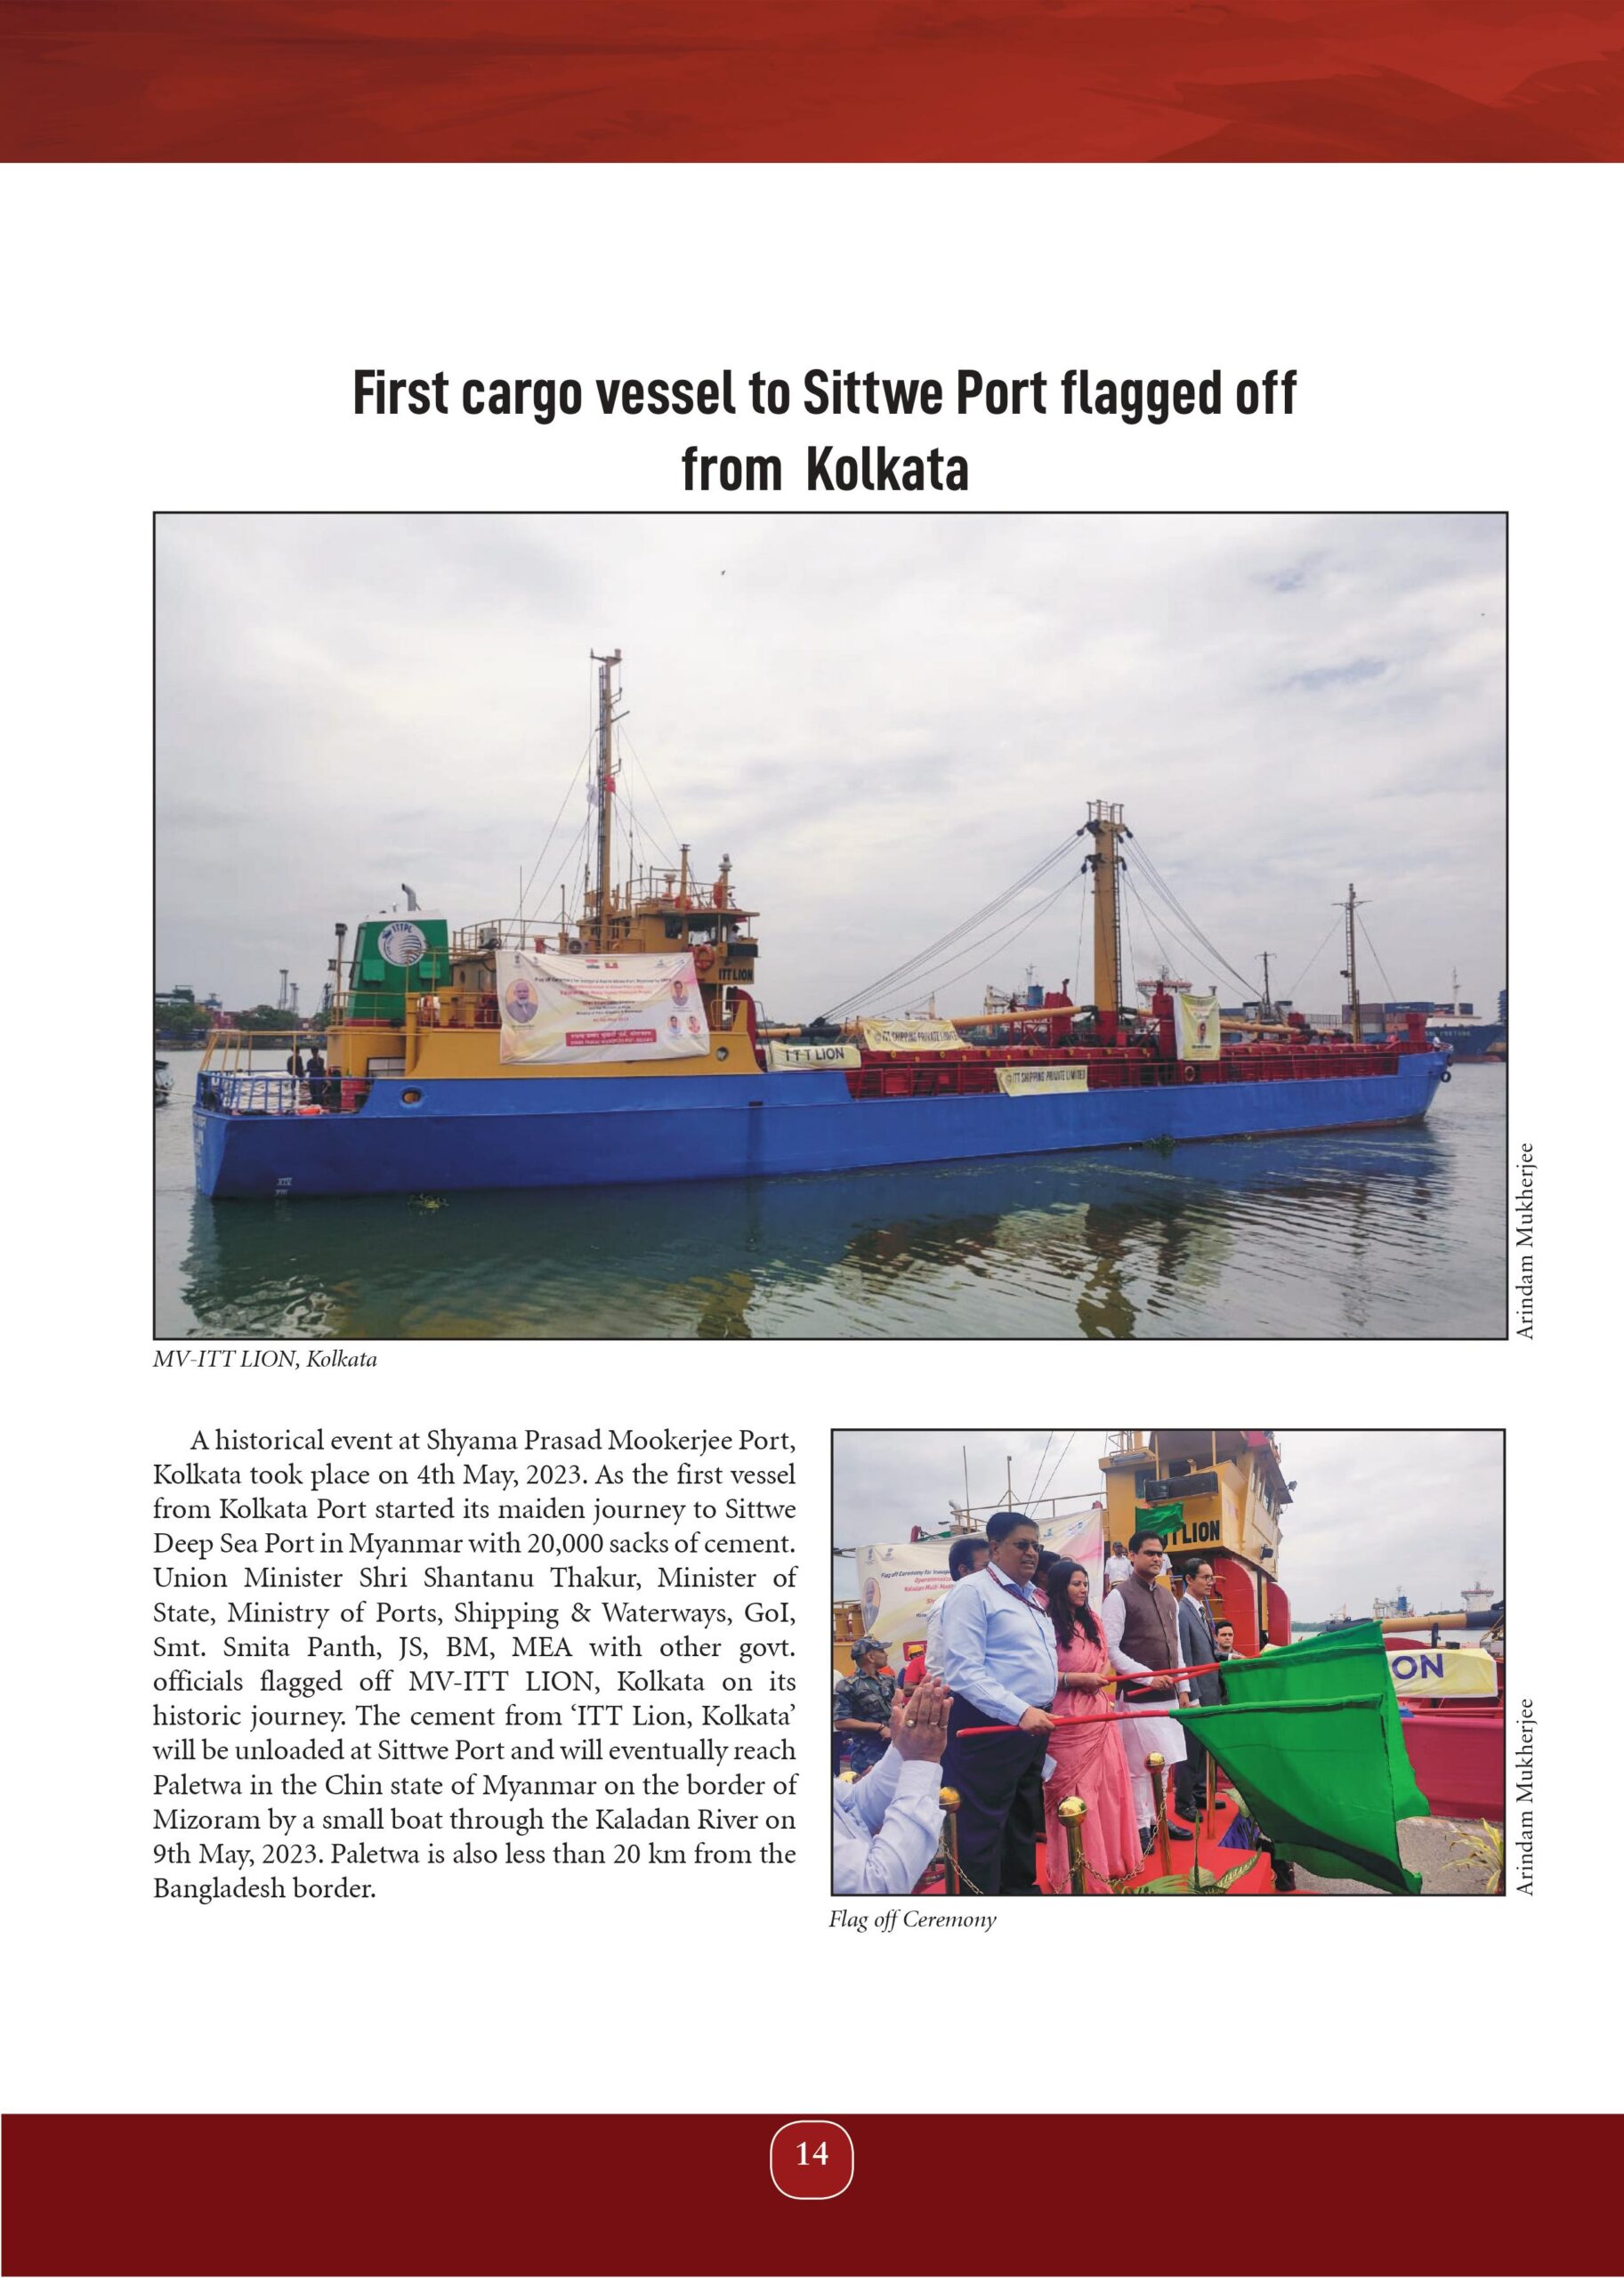 First cargo vessel to Sittwe Port flagged off from Kolkata